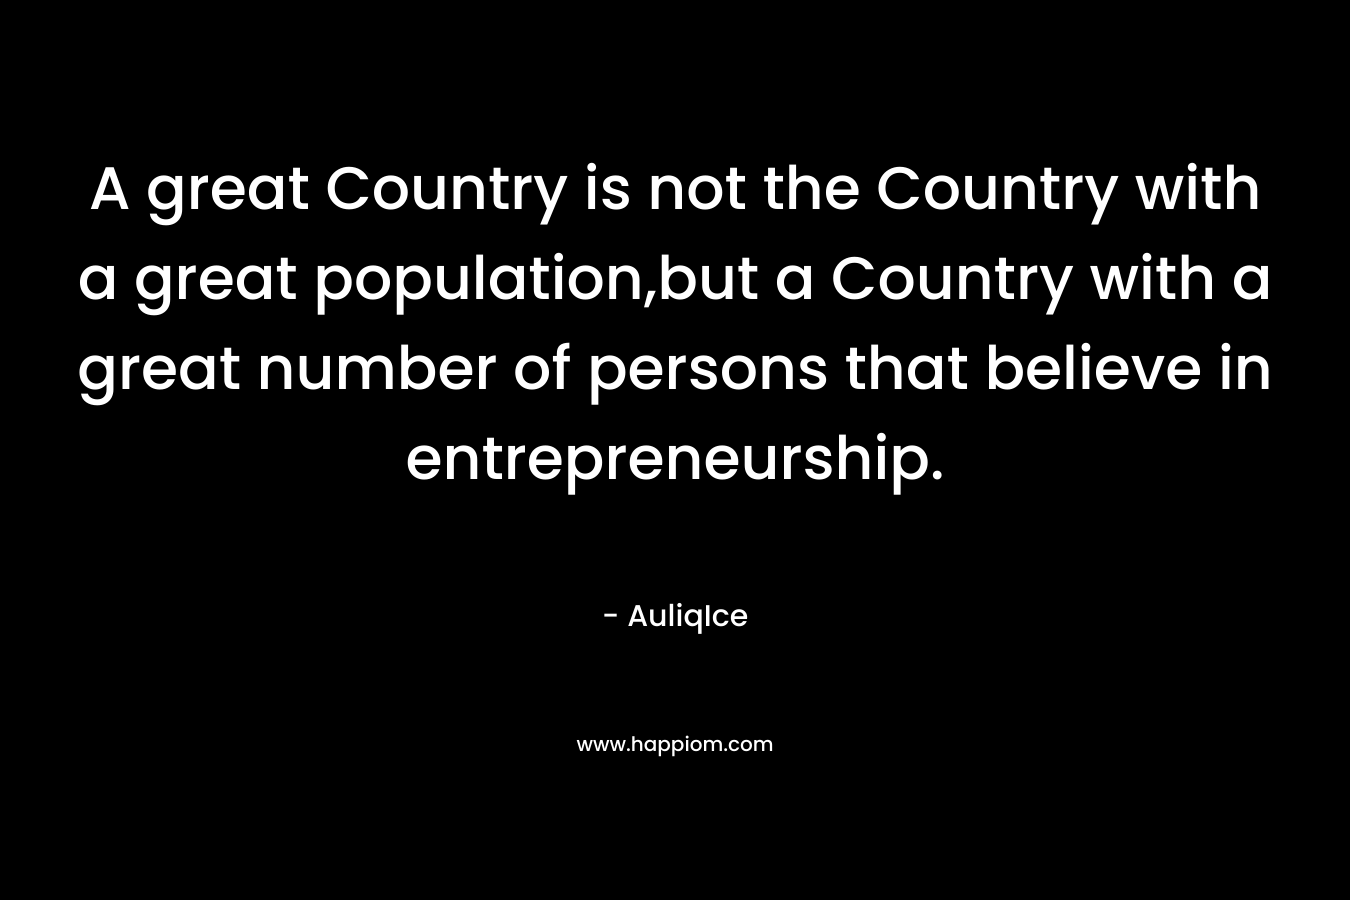 A great Country is not the Country with a great population,but a Country with a great number of persons that believe in entrepreneurship.